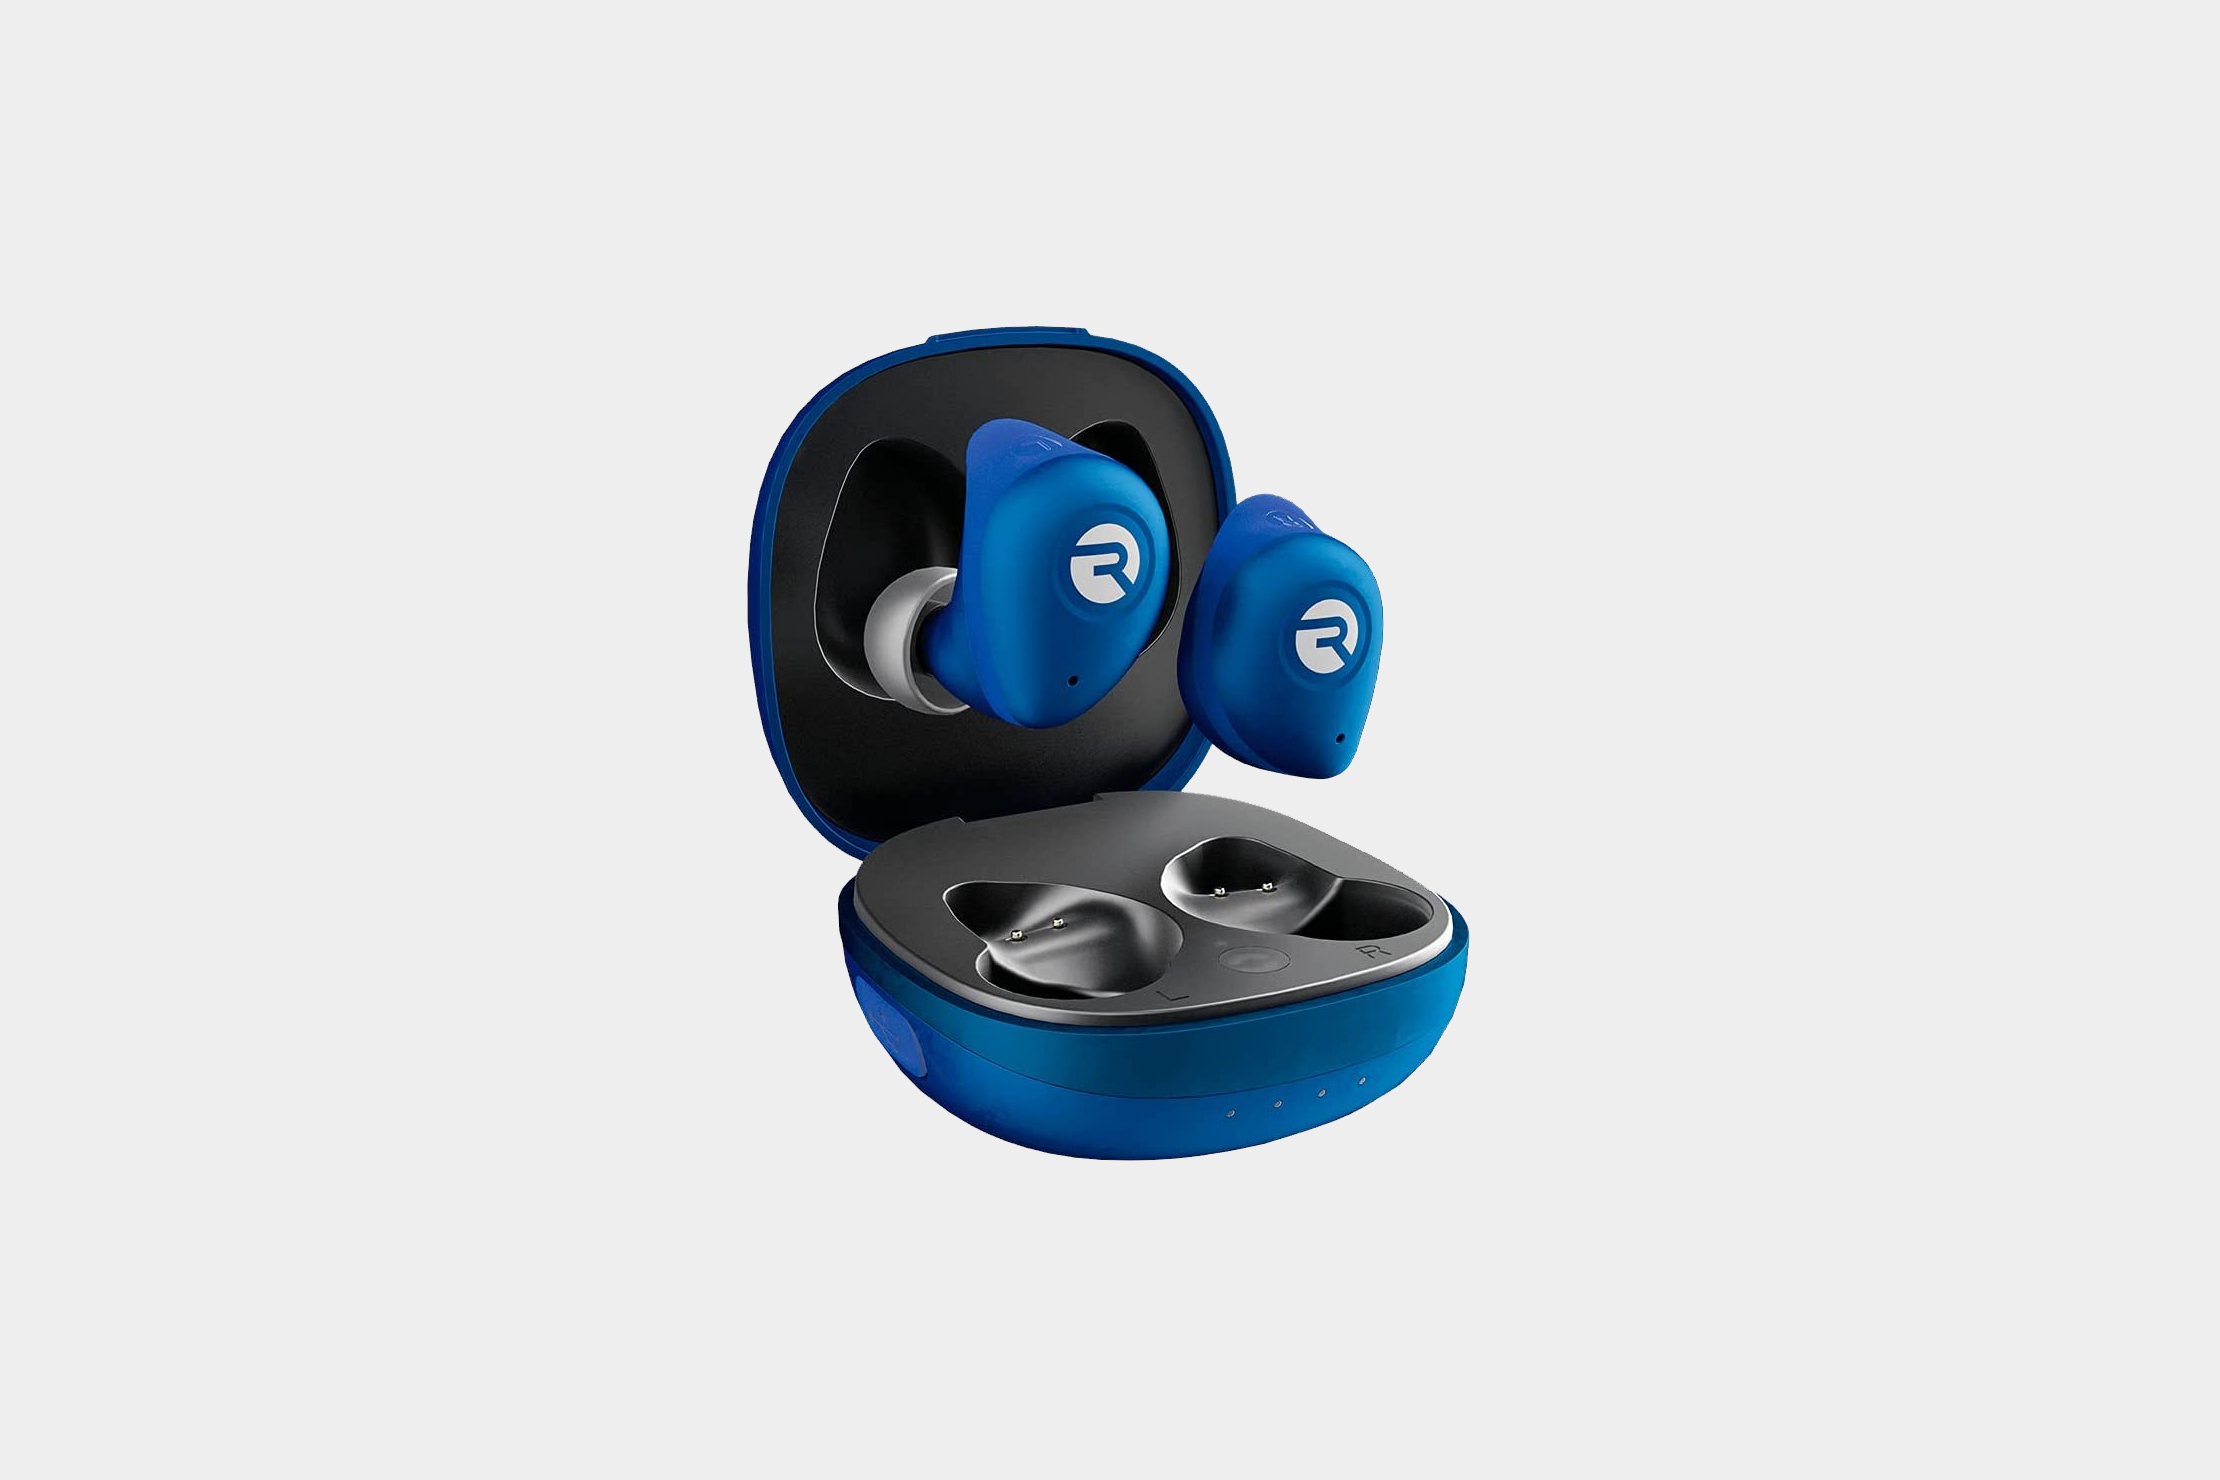 The Fitness Earbuds – Raycon